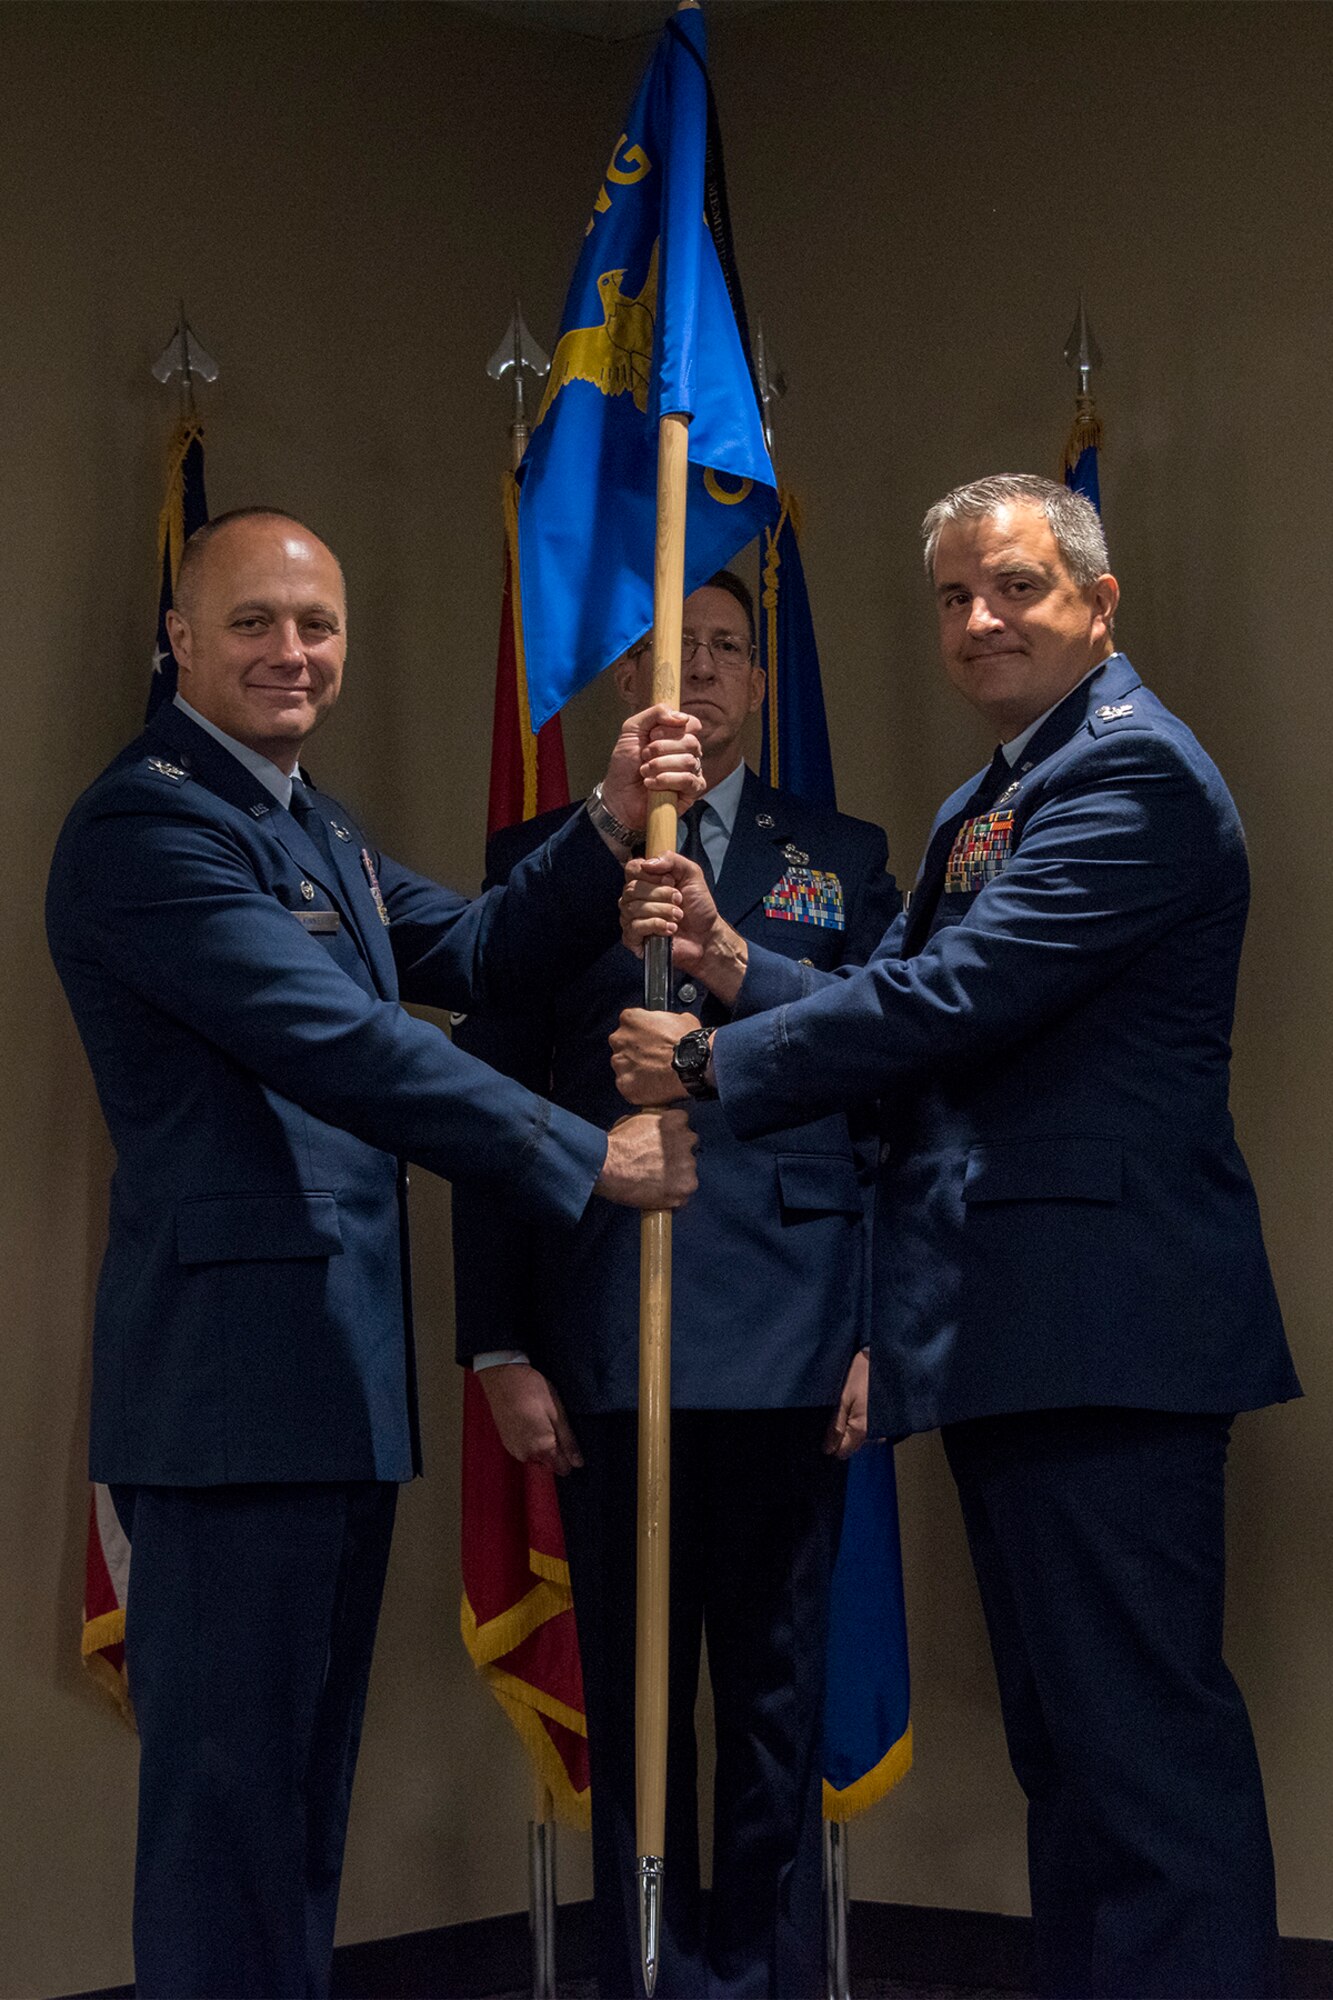 Col. Robert I. Kinney, 188th Wing commander, passes the 188th Operations Group guidon to Col. Patric D. Coggin, 188OG commander, during a change of command ceremony August 7, 2019, at Ebbing Air National Guard Base, Ft. Smith, Arkansas. Coggin assumed command of the group from Col. Jeremiah S. Gentry, who will be promoted to the position of wing vice commander during the wing’s August 2019 unit training assembly. (U.S. Air National Guard photo by Tech. Sgt. John E. Hillier)